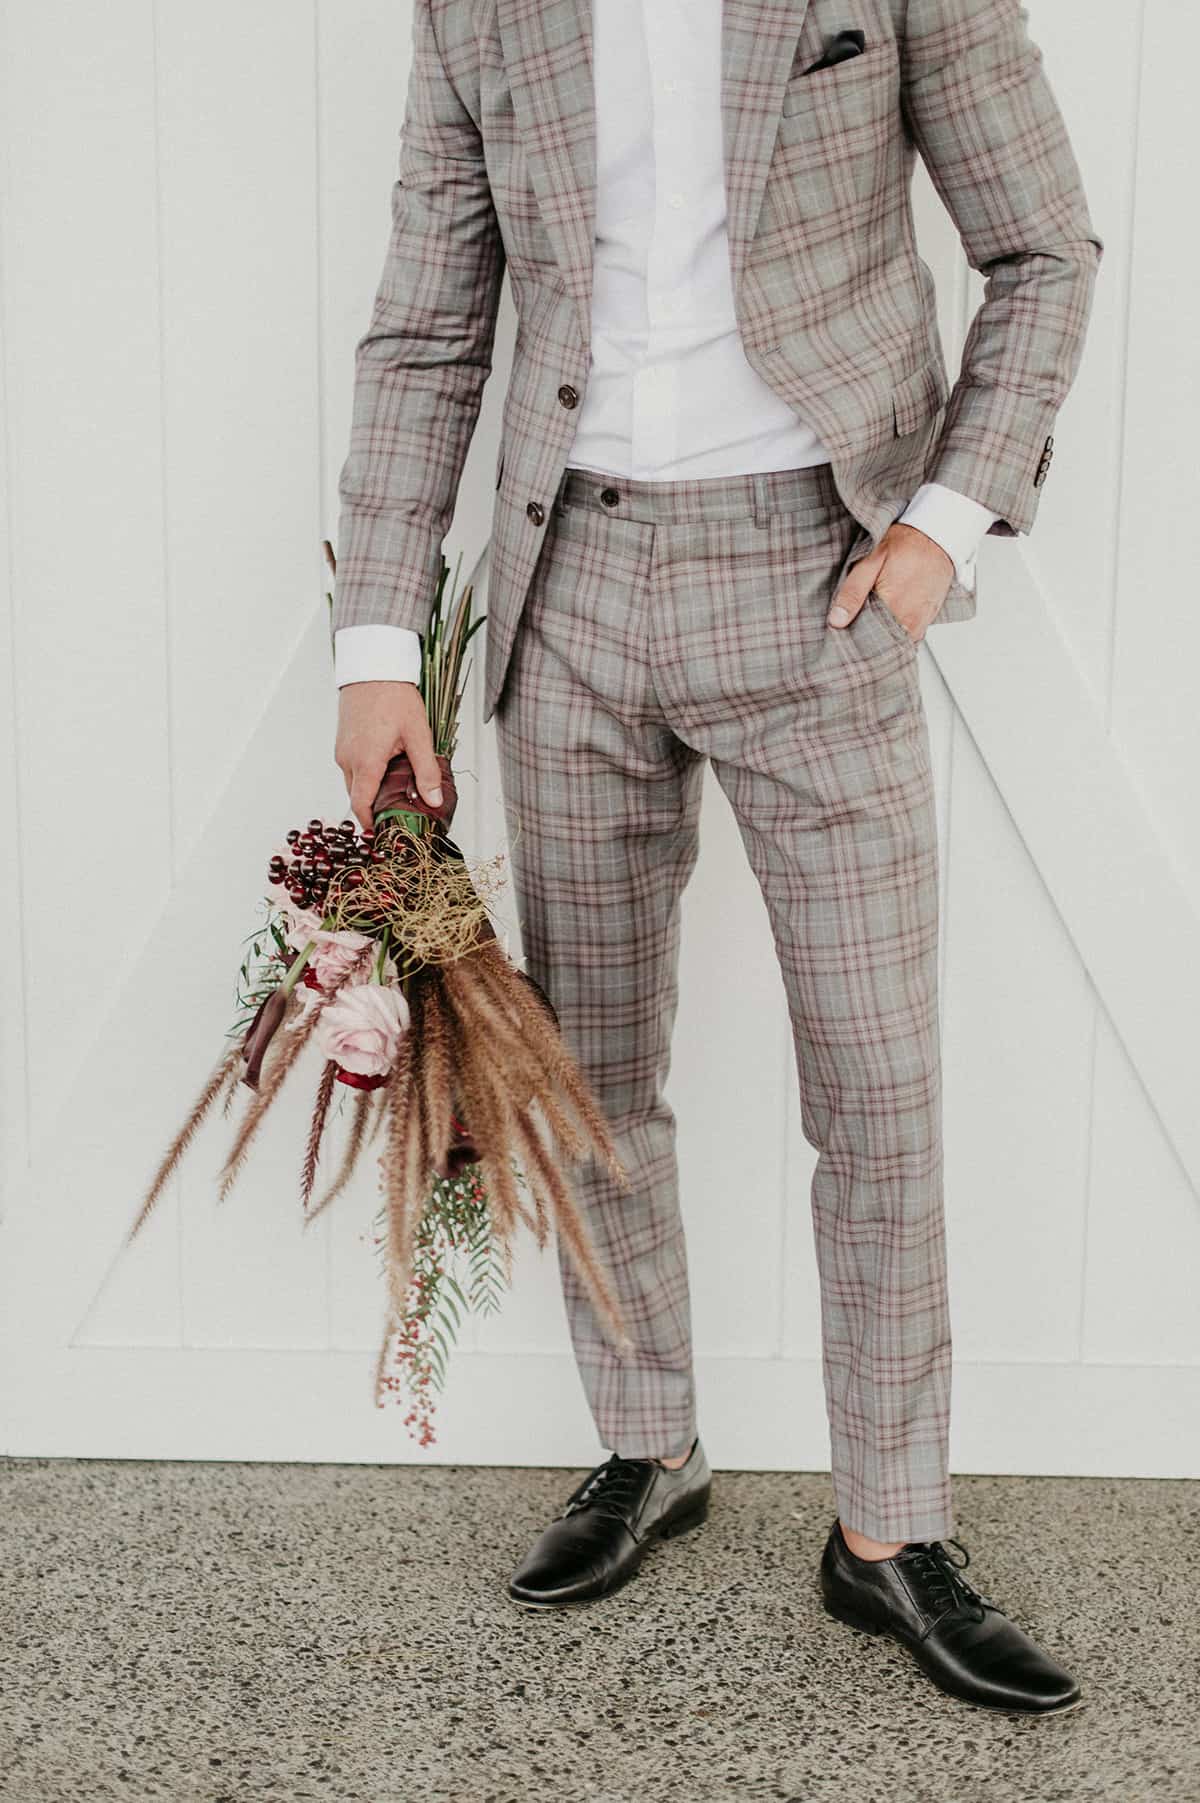 groom with bouquet